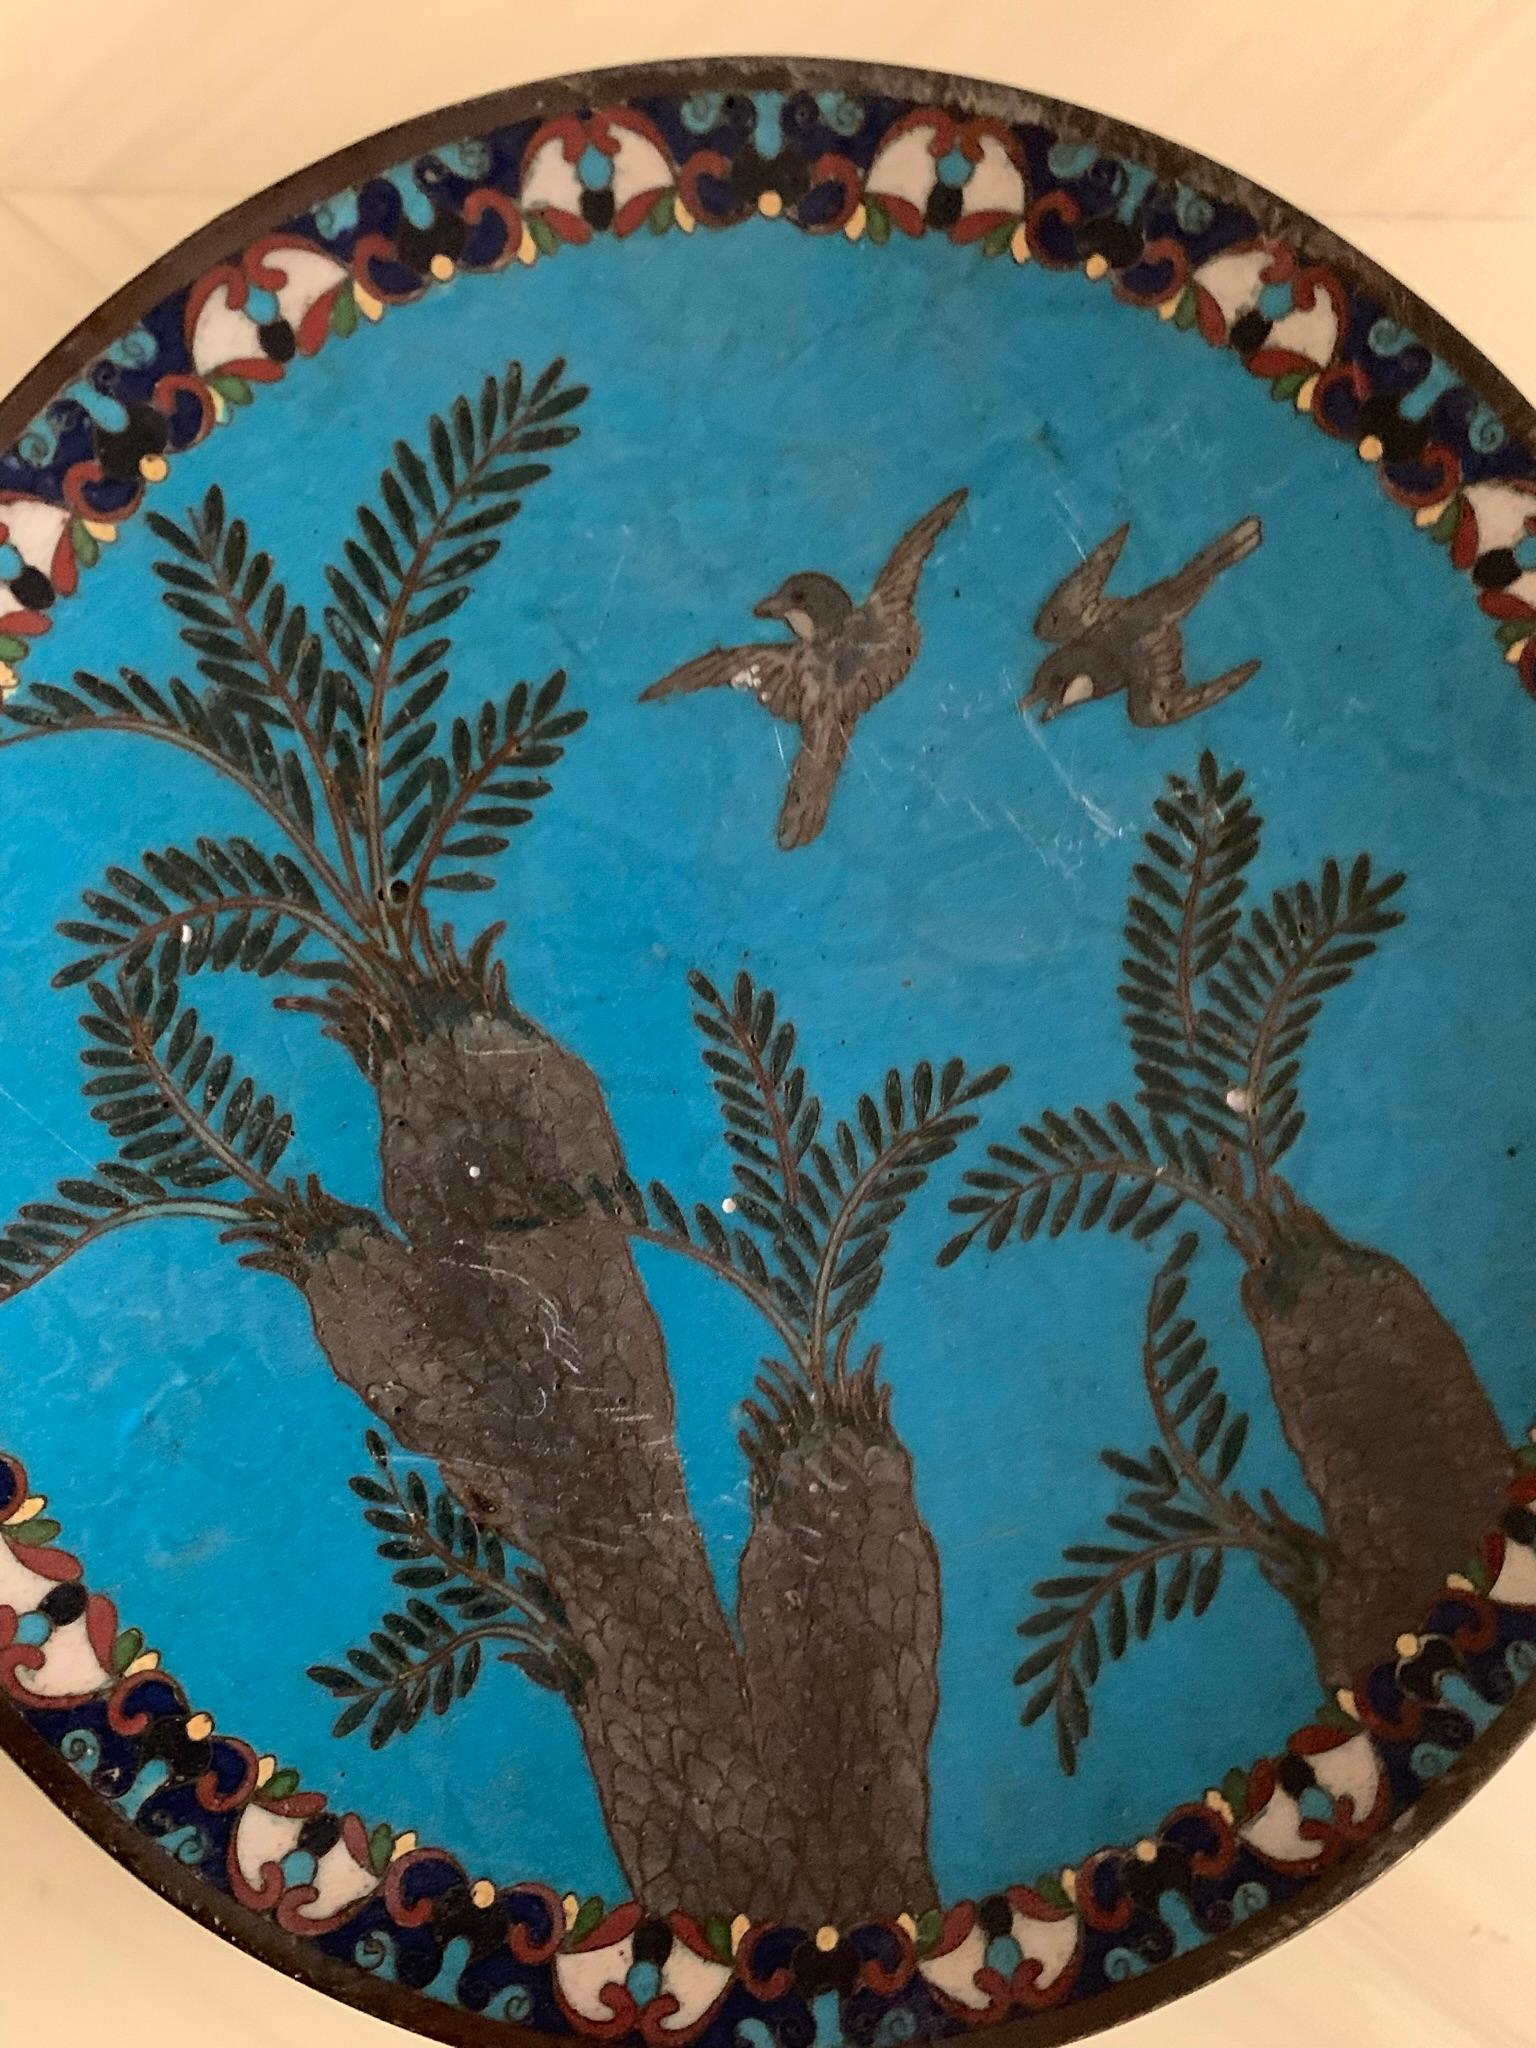 An antique metallic (probably copper) cloisonné plate exquisitely hand-painted in tones of deep turquoise and pewter with accents of burgundy and canary yellow. Depicting palms and sparrows in flight. Possibly from Arabia circa late 19th century.